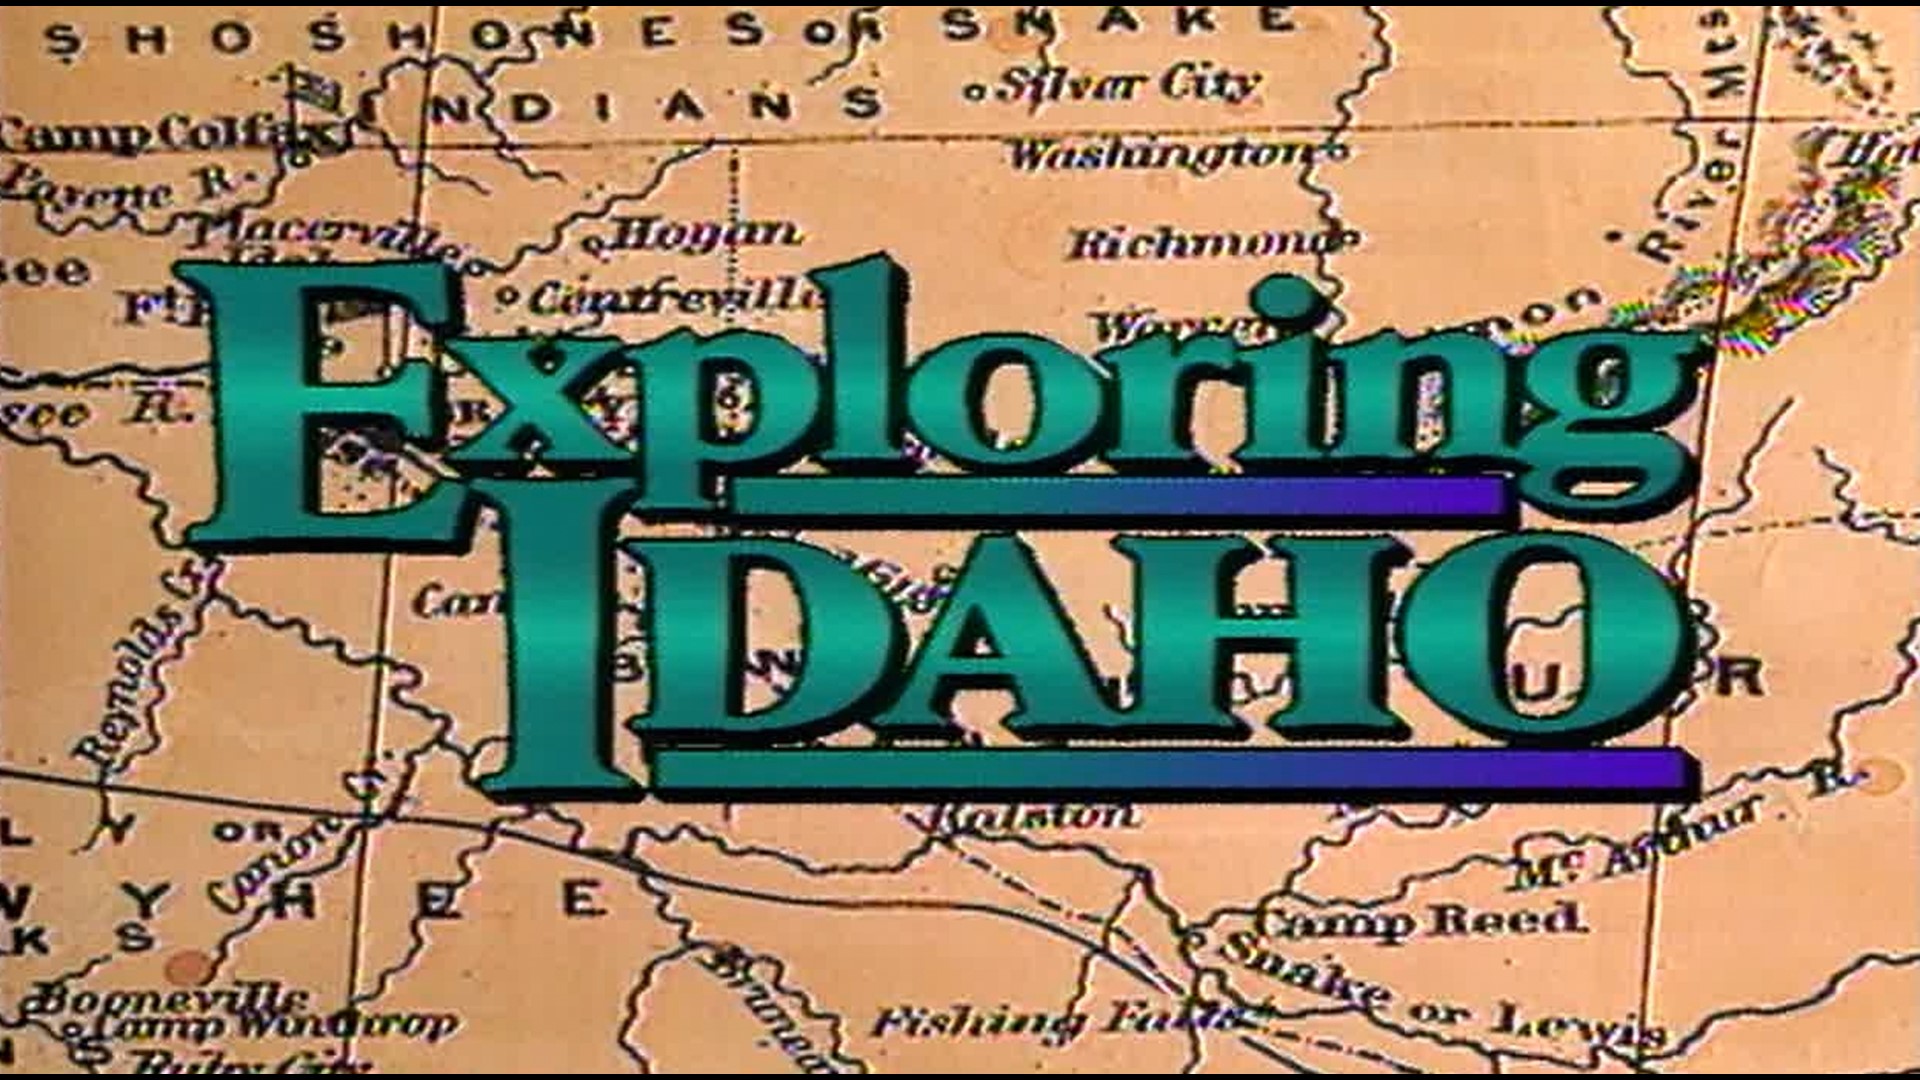 The 'Best of Exploring Idaho' for 1993